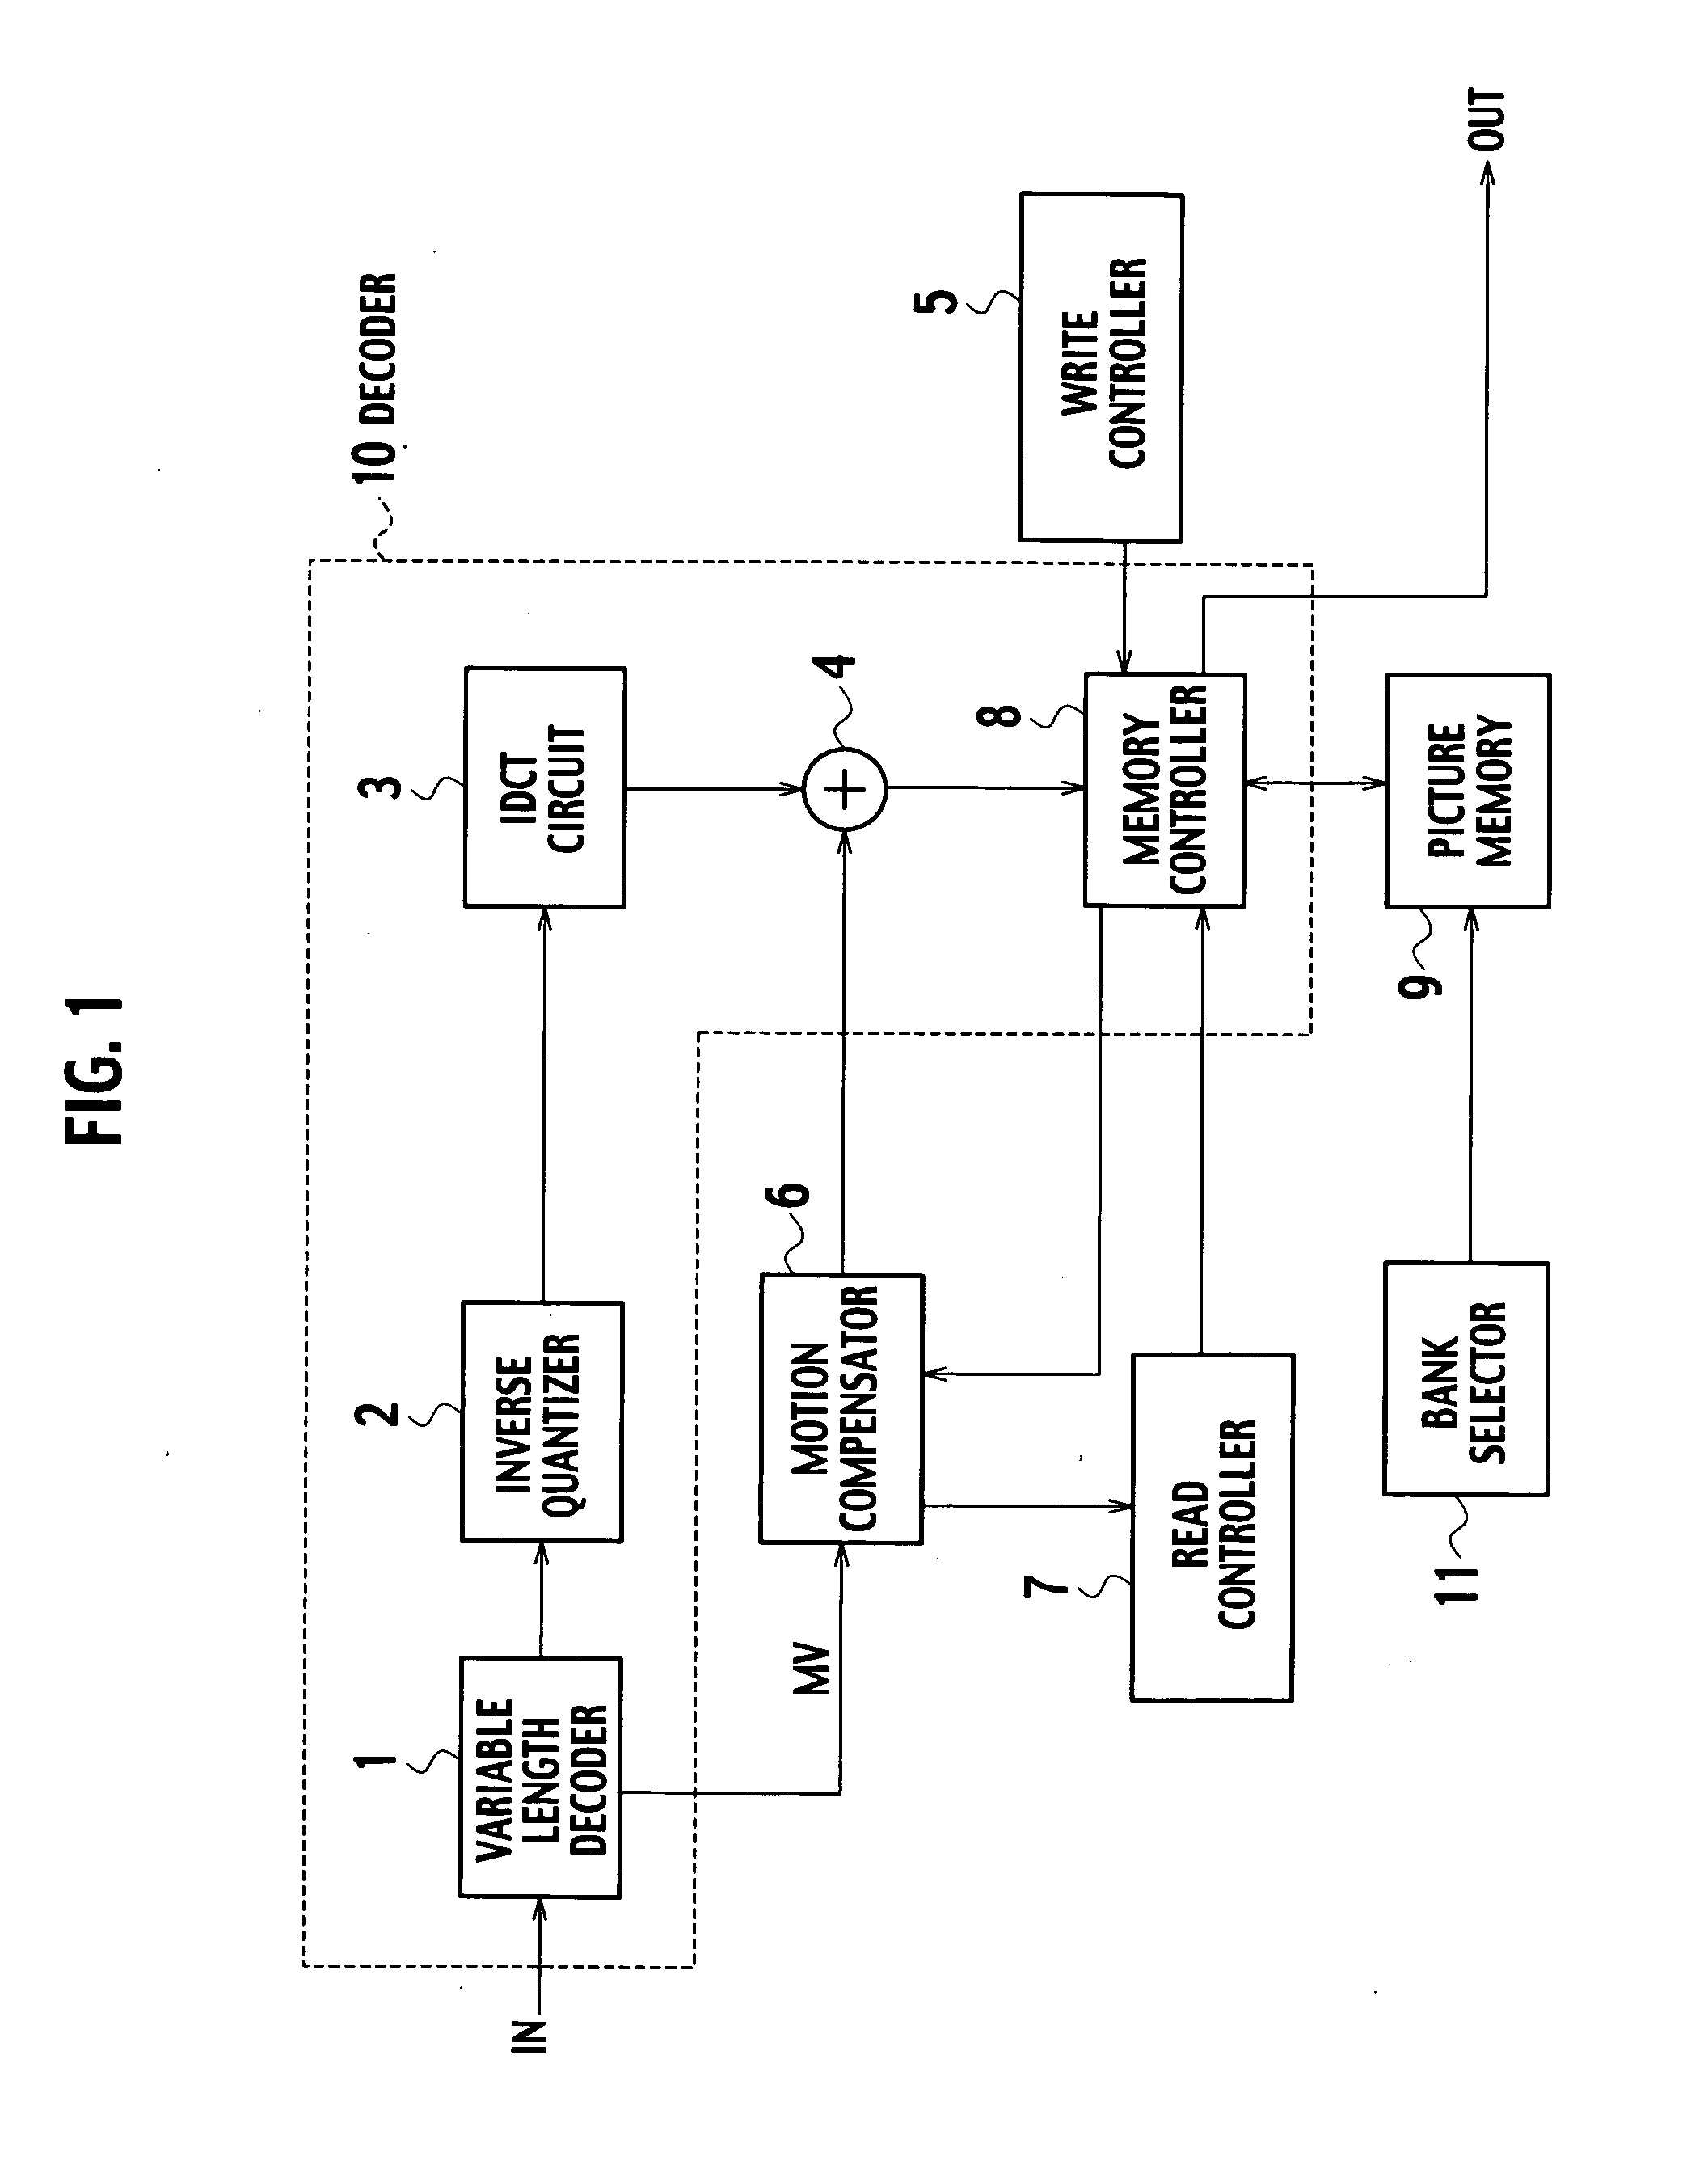 Picture processing apparatus, semiconductor integrated circuit, and method for controlling a picture memory